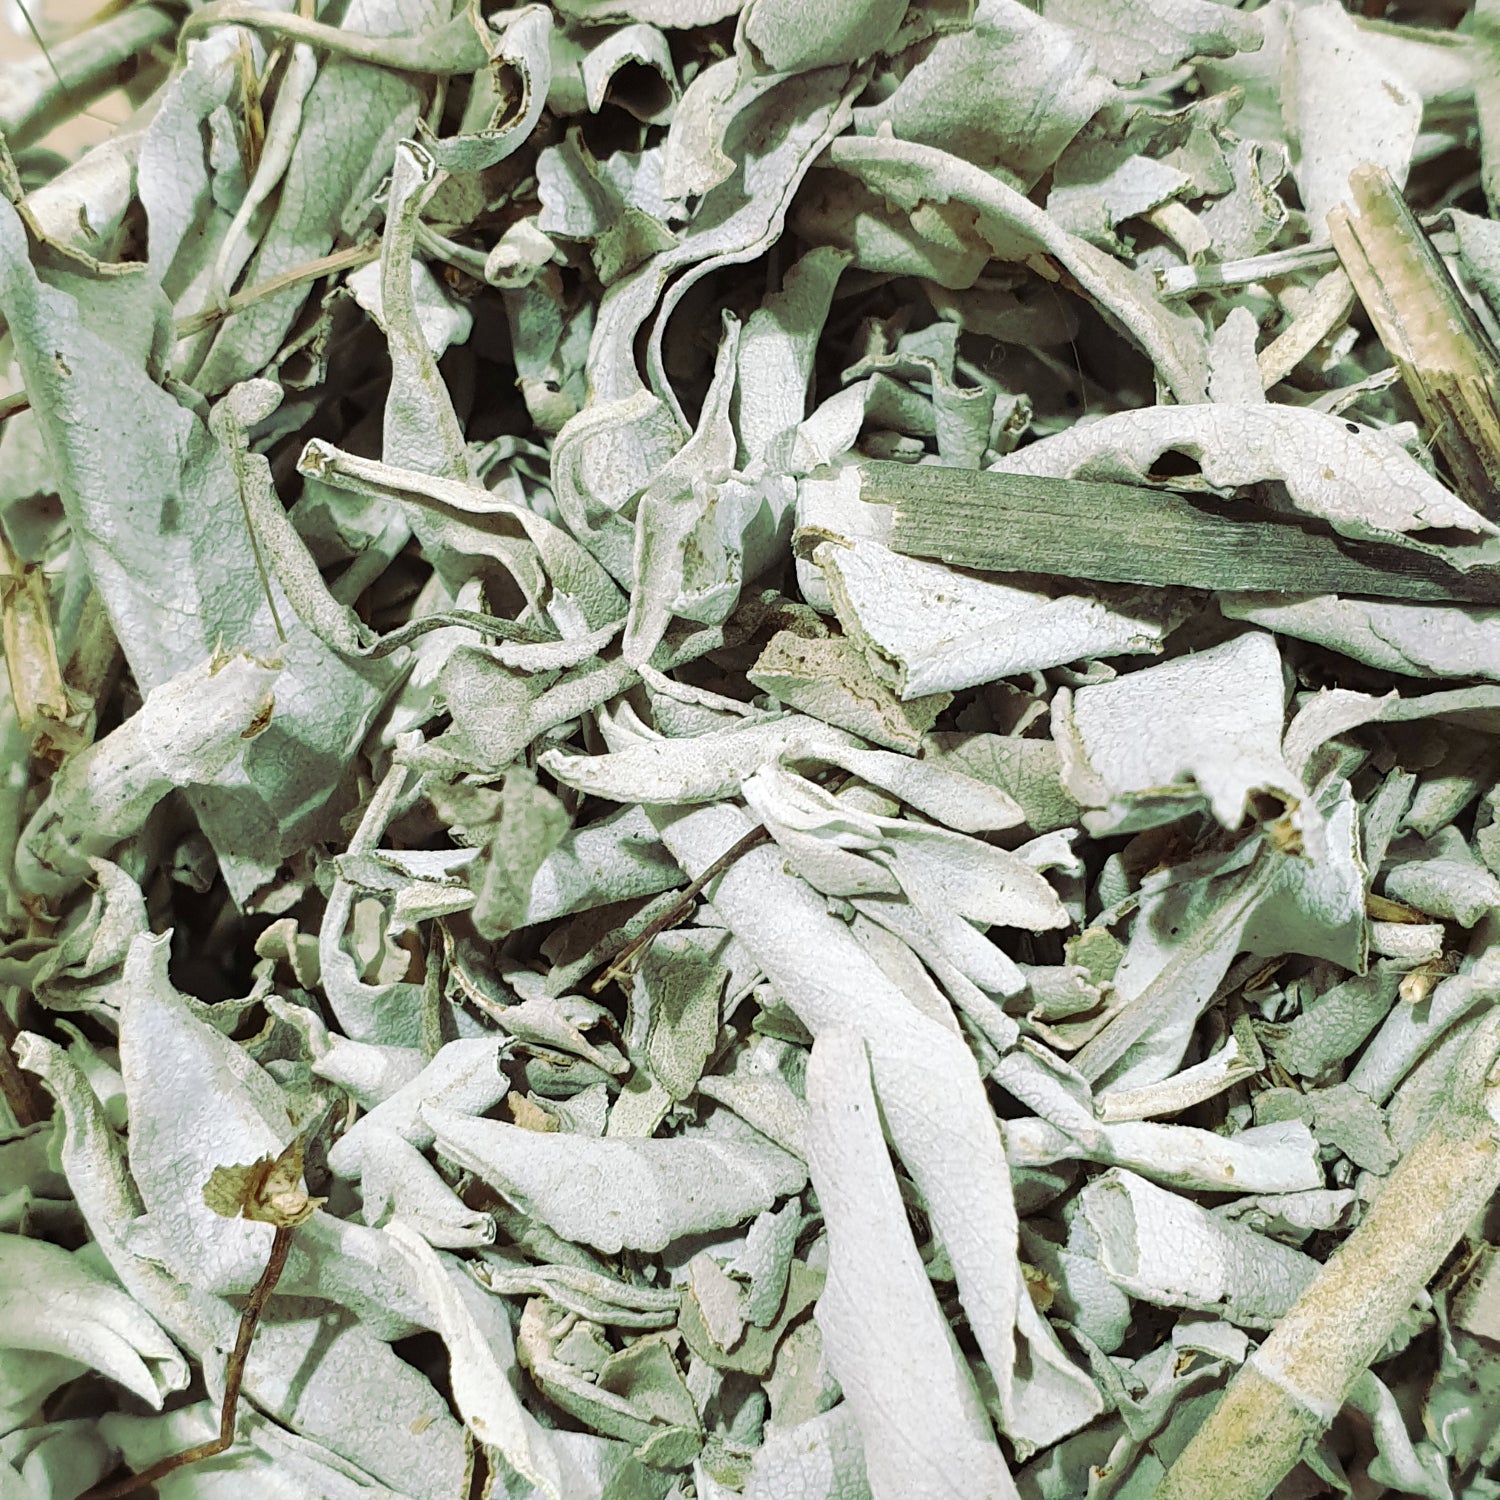 Sage magickal uses include smoke cleansing, protection and purification. 